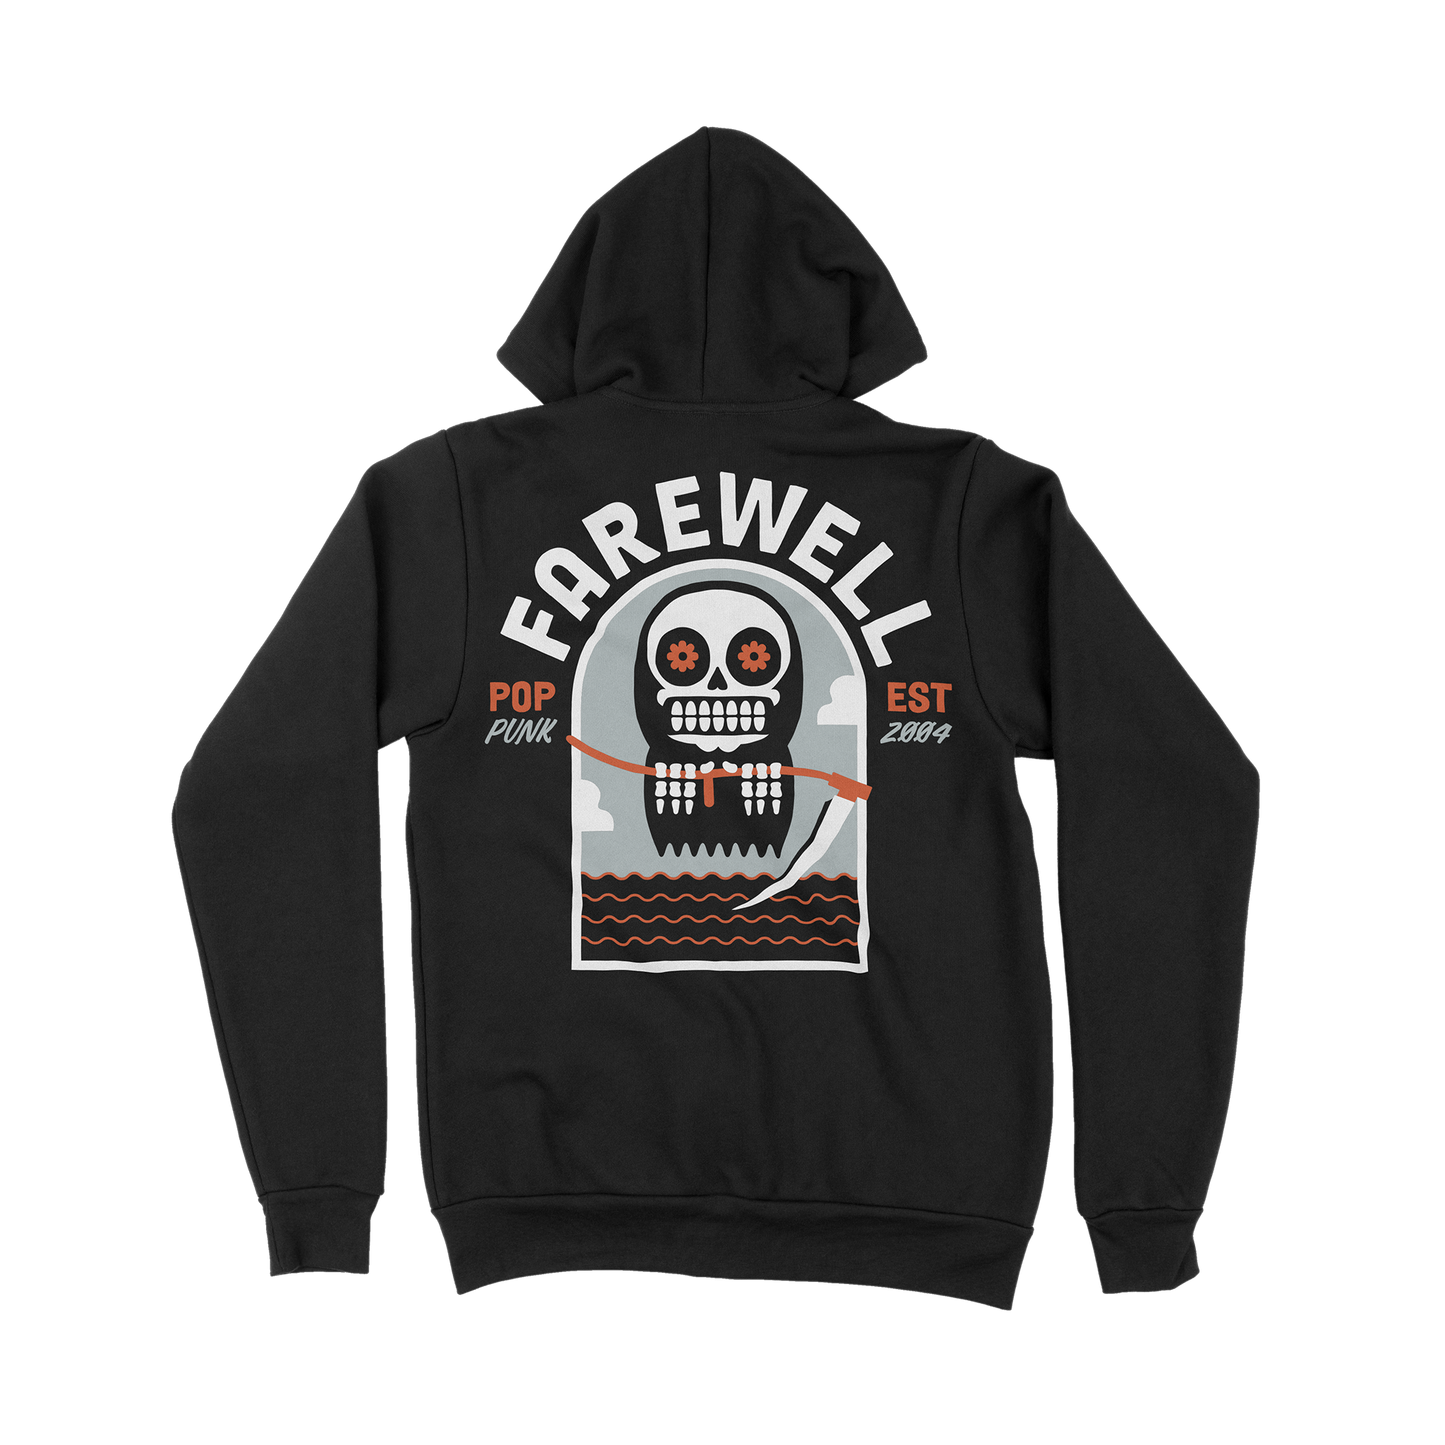 Farewell - "Isn't This Supposed To Be Fun" Zip Up Hoodie